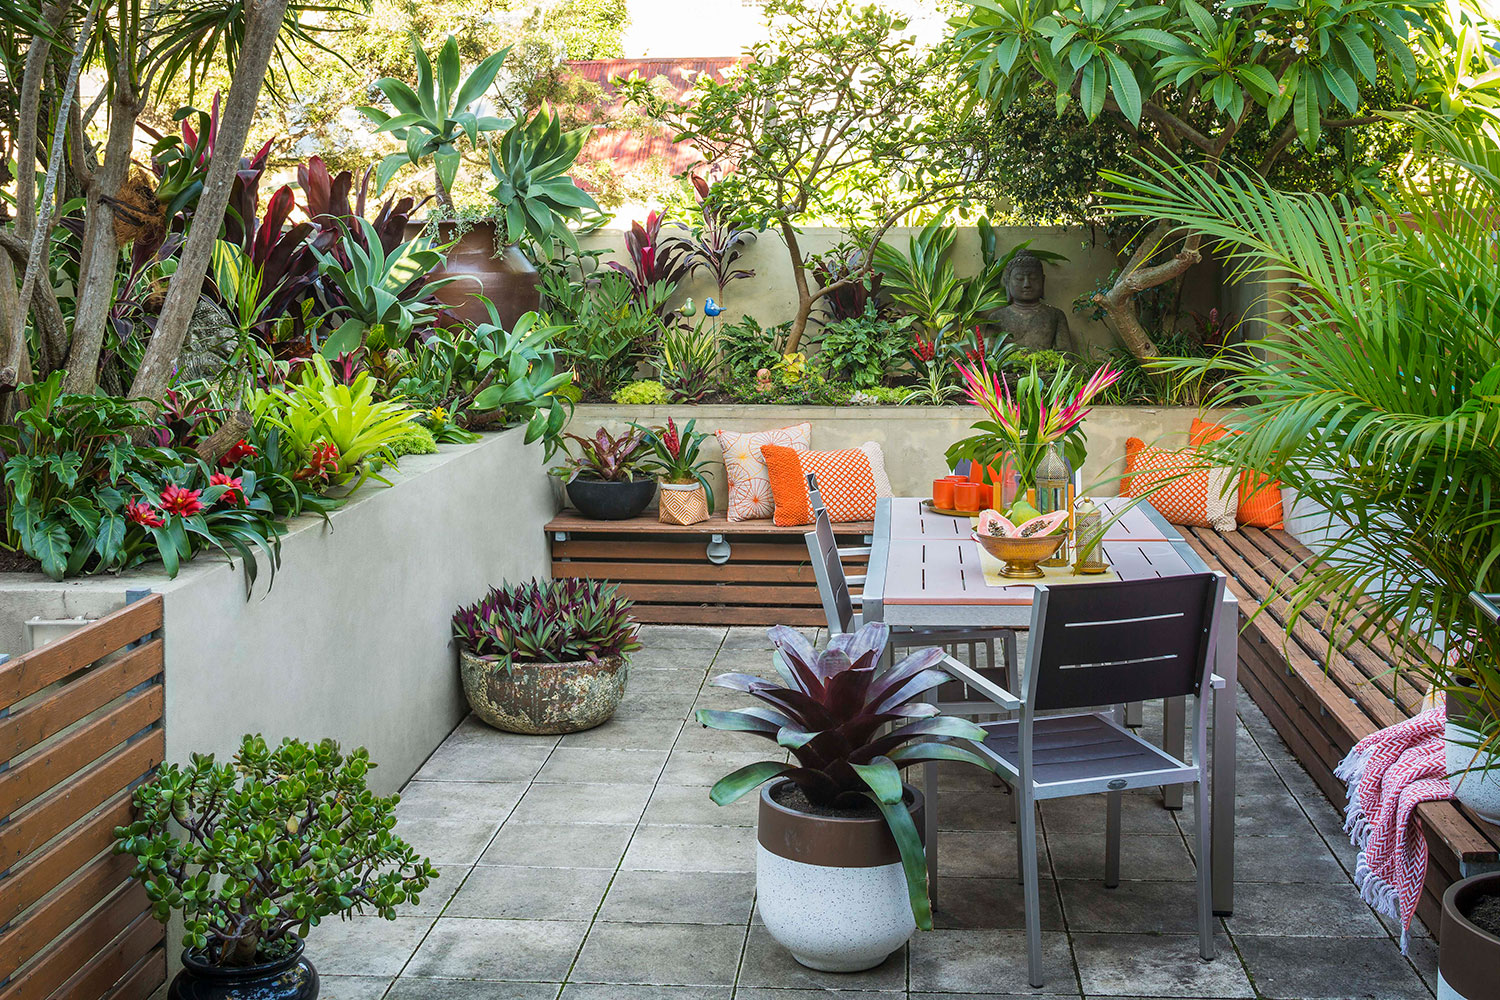 Small terraced house garden makeover using lush tropical plants | Better Homes and Gardens